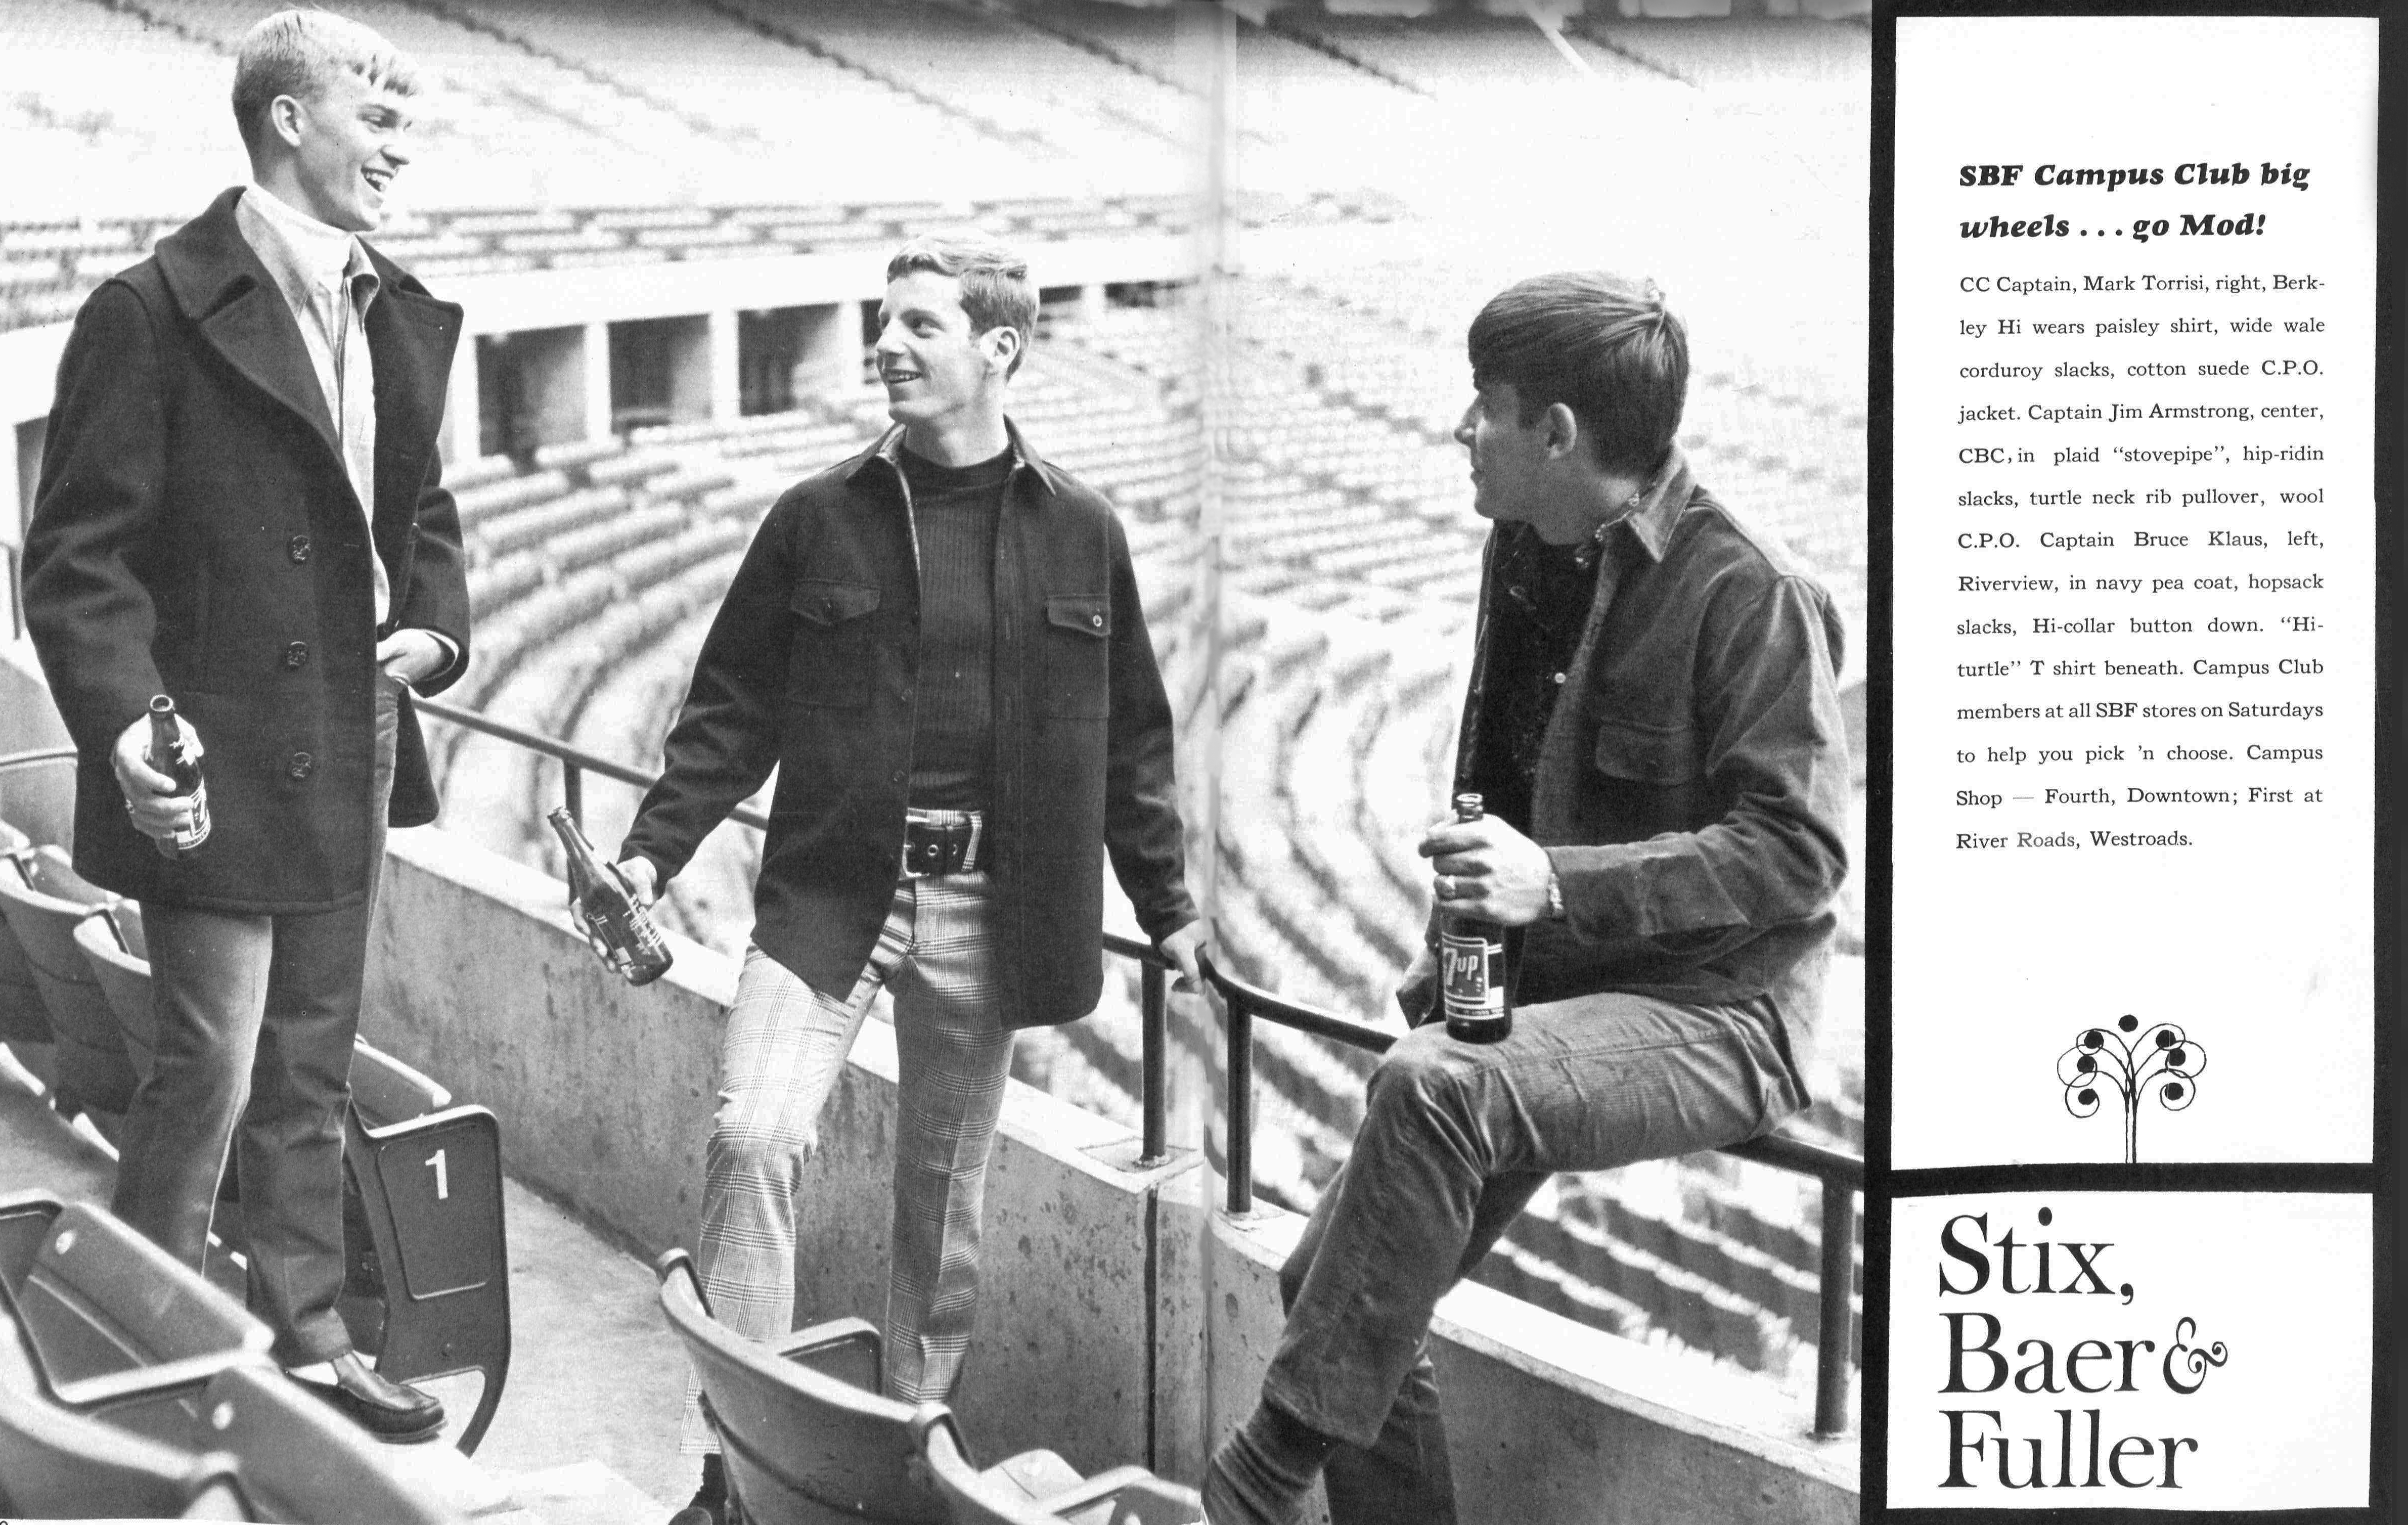 That's Bruce Klaus (left), Member of the SBF Campus Club, modeling a navy pea coat, hopsack slacks and Hi-collar button down and drinking a 7UP inside the newly-constructed Busch Stadium.  PROM MAGAZINE OCTOBER 1966